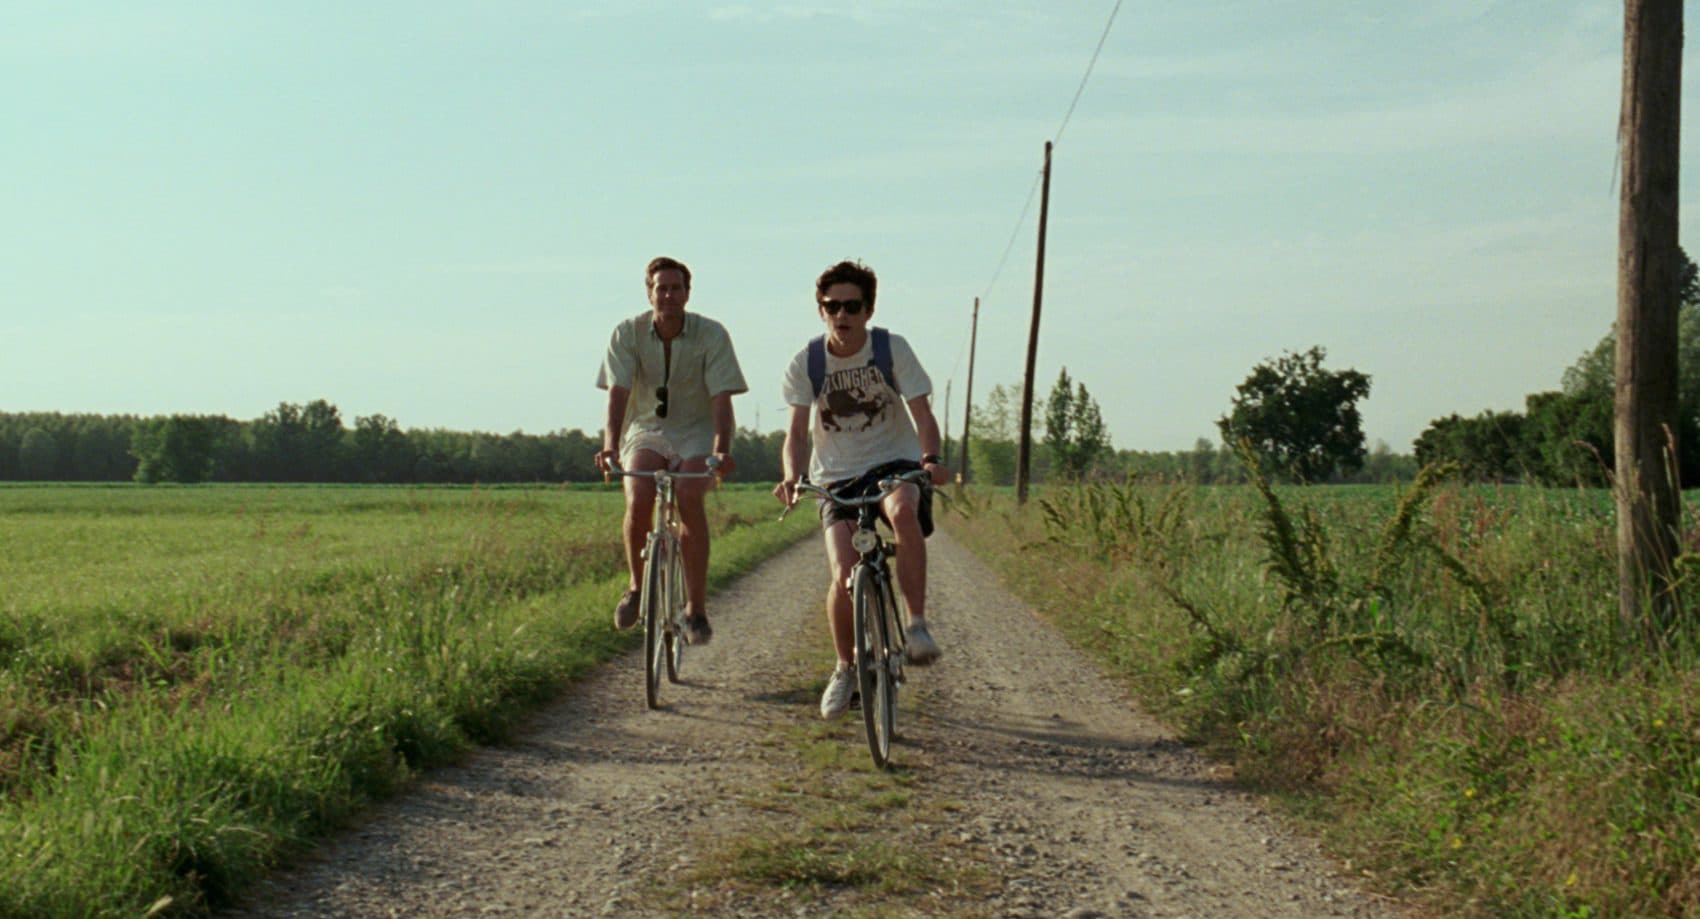 Armie Hammer as Oliver (left) and Timothée Chalamet as Elio in &quot;Call Me by Your Name.&quot; (Sayombhu Mukdeeprom, Courtesy of Sony Pictures Classics)